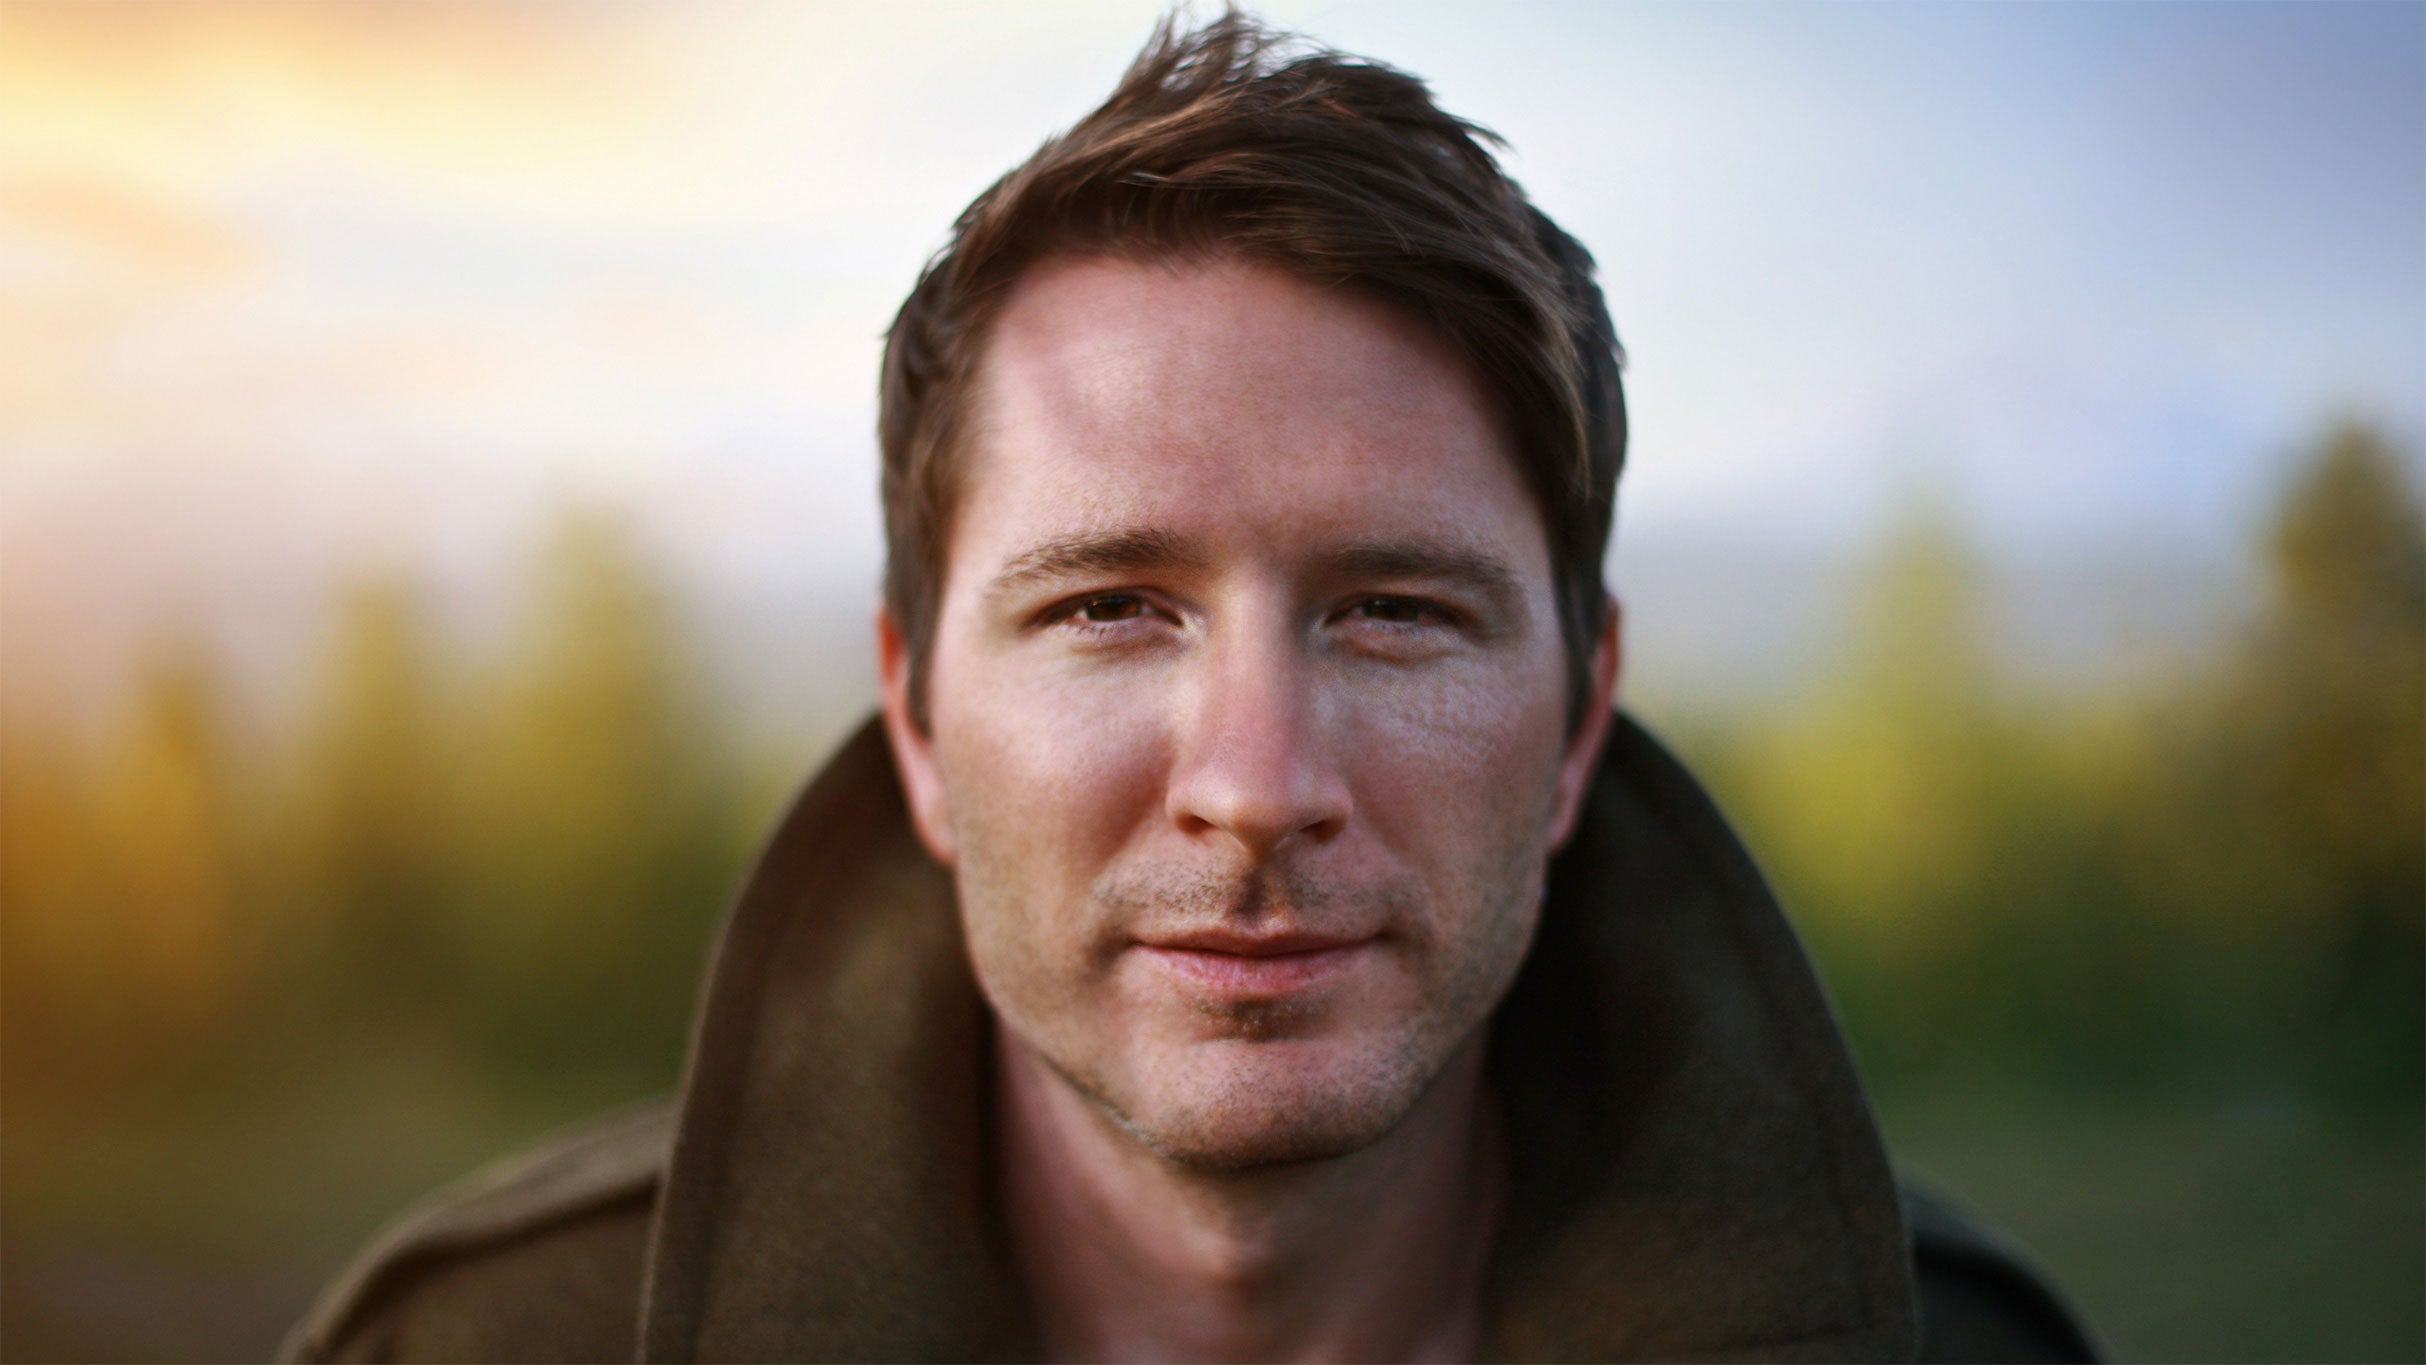 presale password for Owl City presale tickets in Ponte Vedra Beach at Ponte Vedra Concert Hall